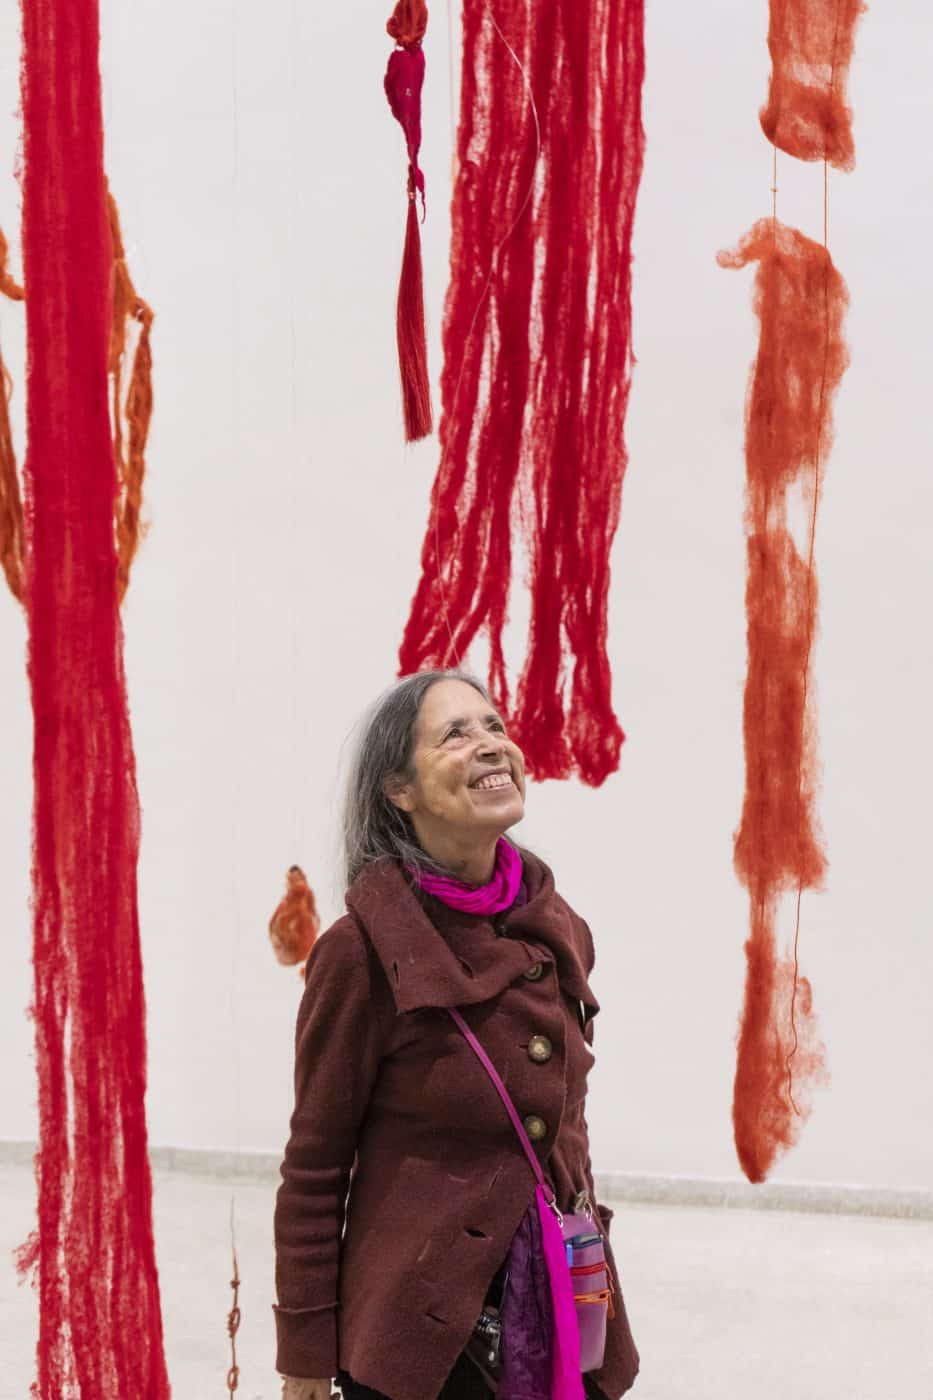 Cecilia Vicuña stands amid her new fiber-based installation Quipu del Exterminio (Extermination Quipu) suspended from the ceiling of New York's Guggenheim Museum as part of the show “Cecilia Vicuña: Spin Spin Triangulene.”